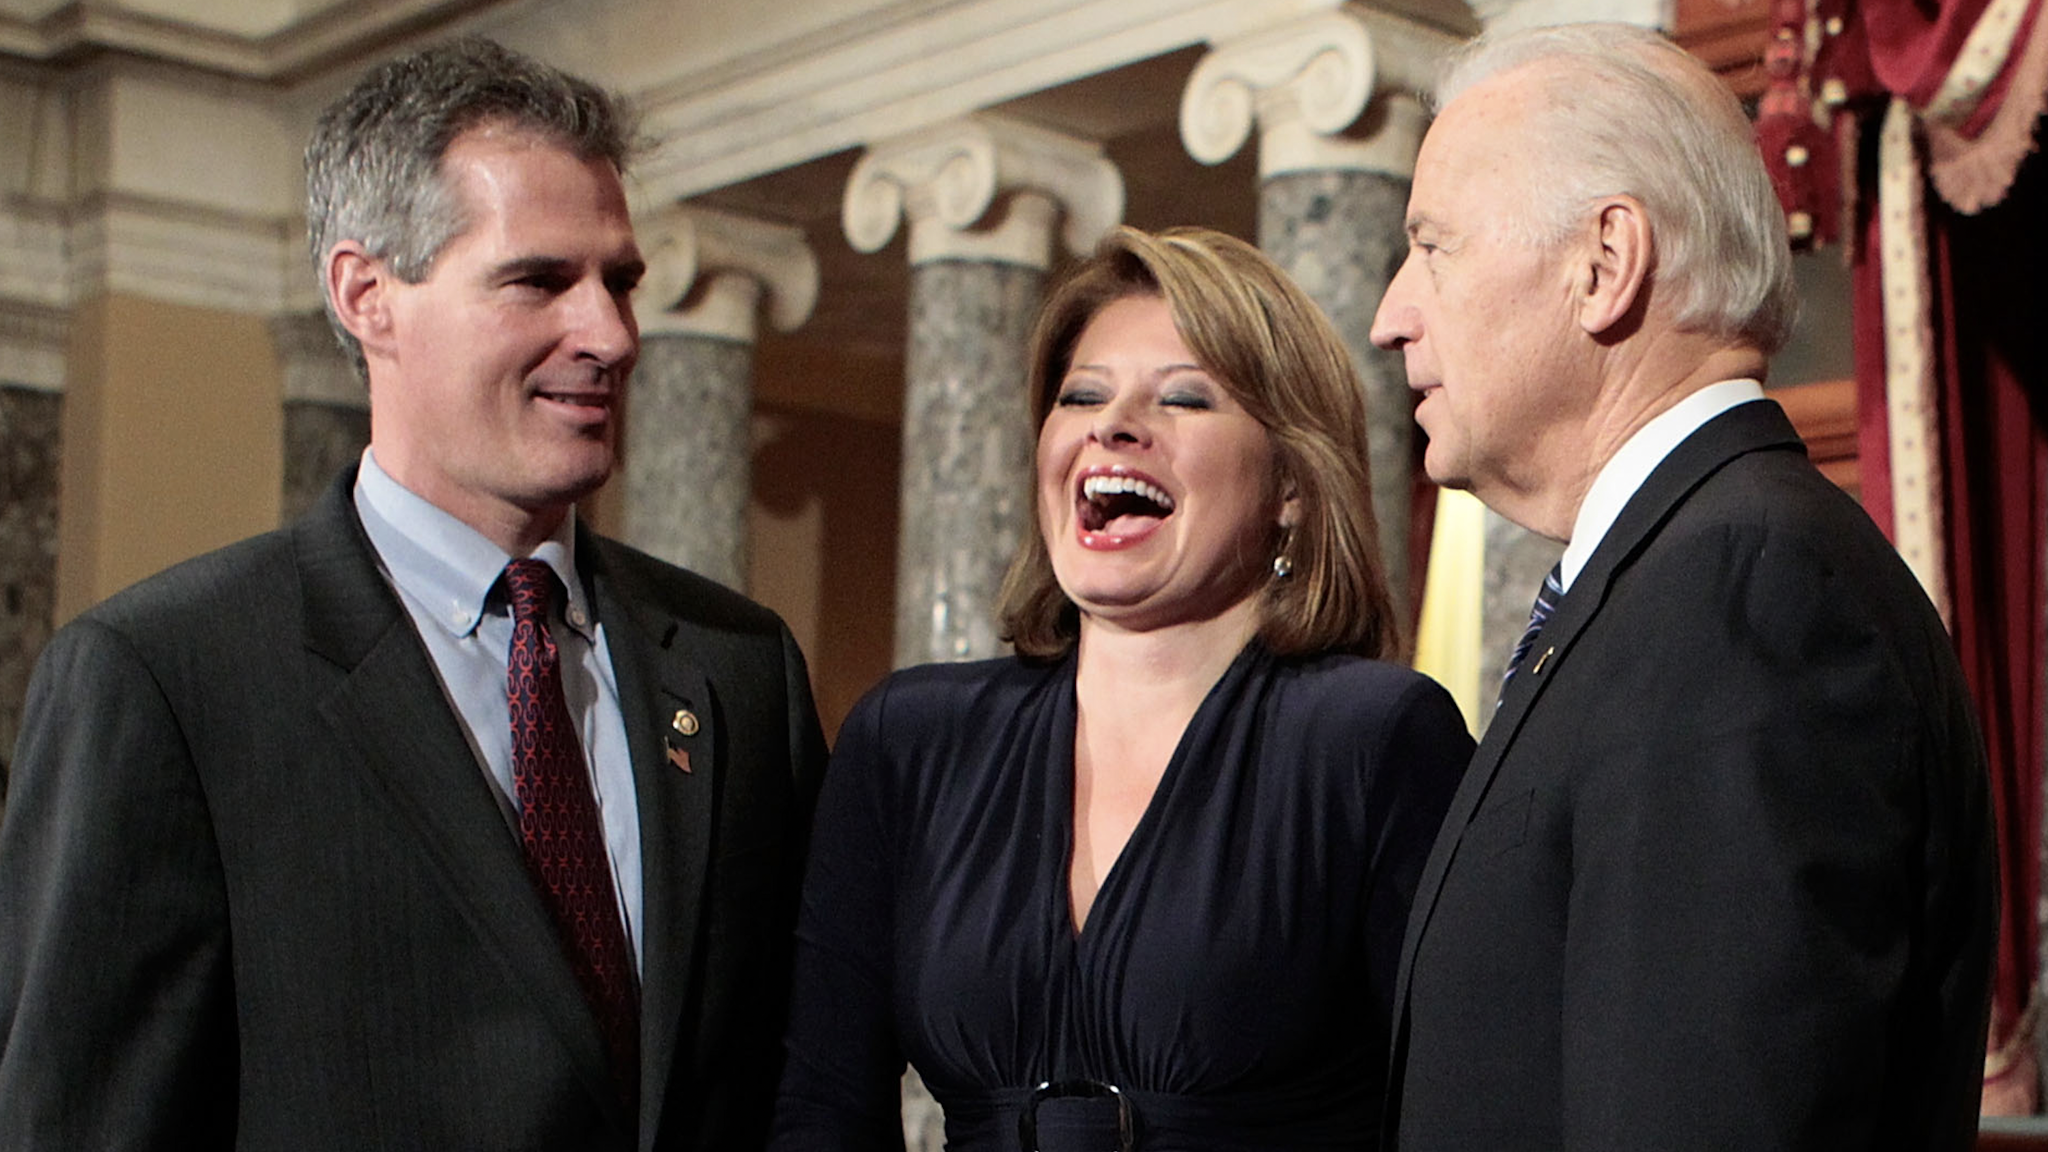 WASHINGTON - FEBRUARY 04: Gail Huff (C), wife of U.S. Senator Scott Brown (R-MA) (L), laughs as Brown participates in a ceremonial swearing-in with Vice President Joseph Biden (R) February 4, 2010 on Capitol Hill in Washington, DC.